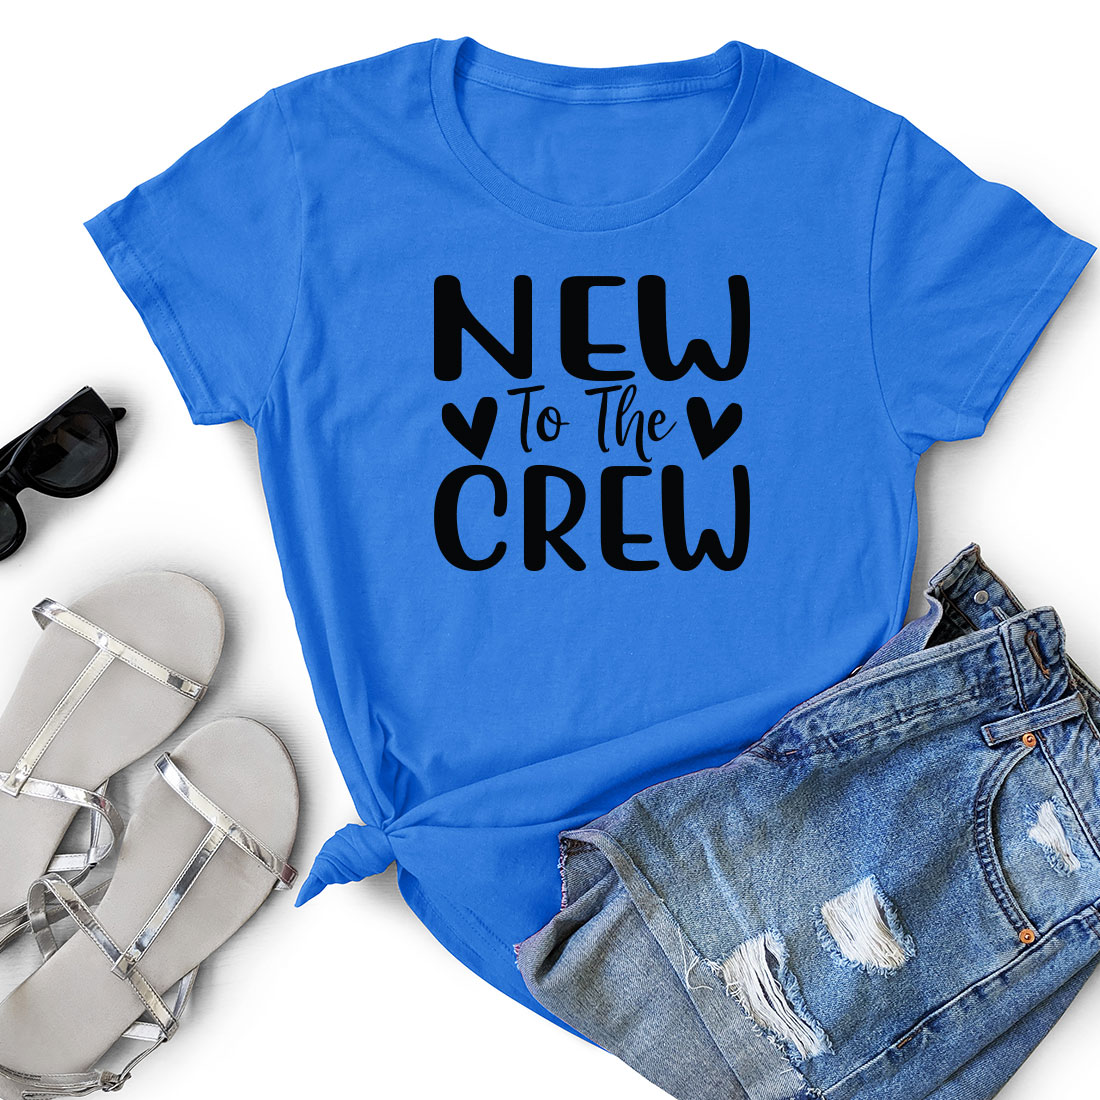 T - shirt that says new to the crew next to a pair of shorts.